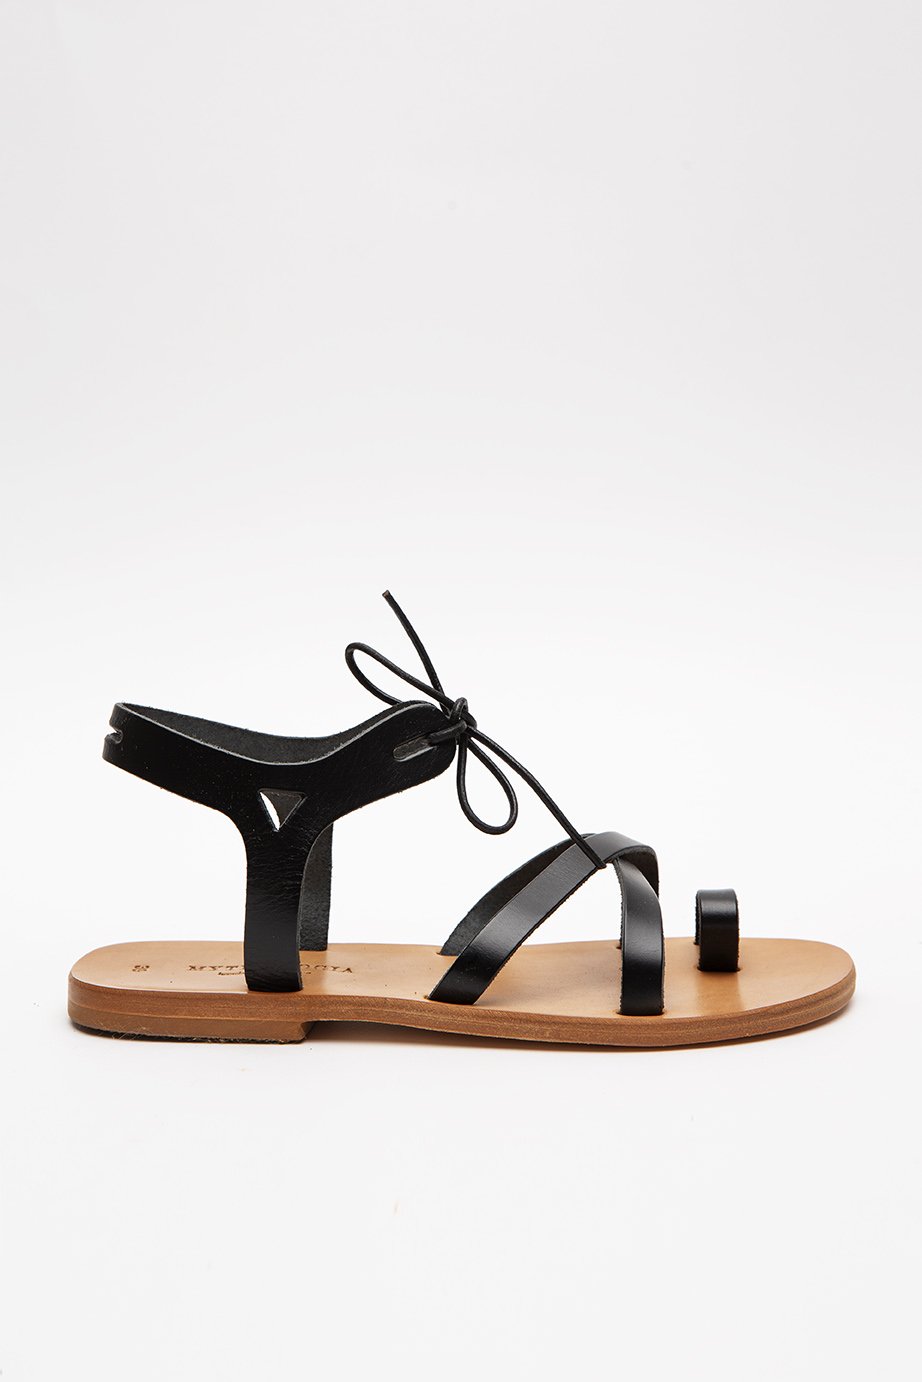 LEMNOS COLLECTION — Mythologia Handcrafted Leather Sandals